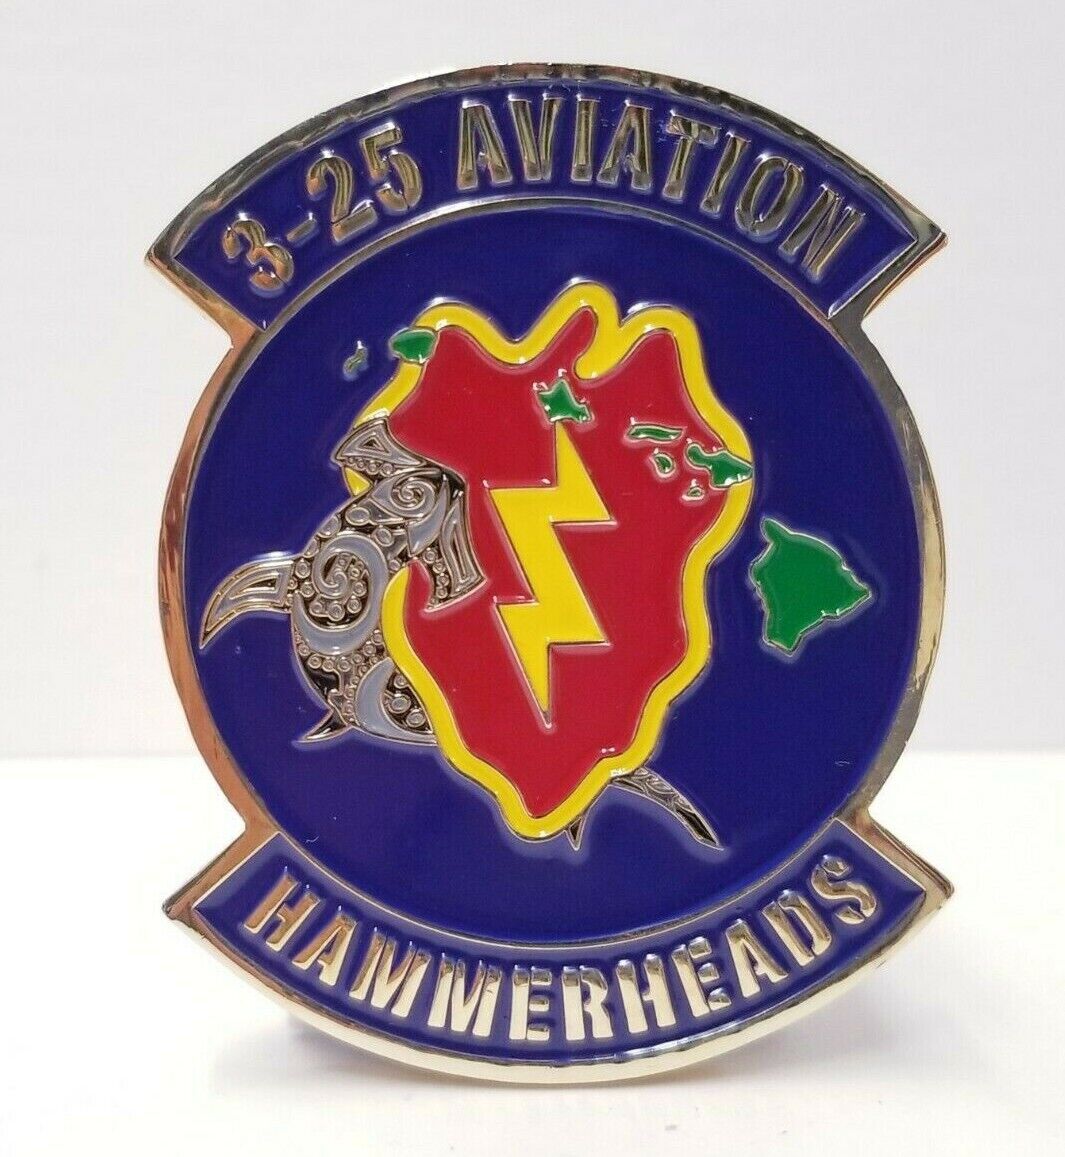 3rd Battalion 25th Aviation Hammerheads Challenge Coin Presented for Excellence 